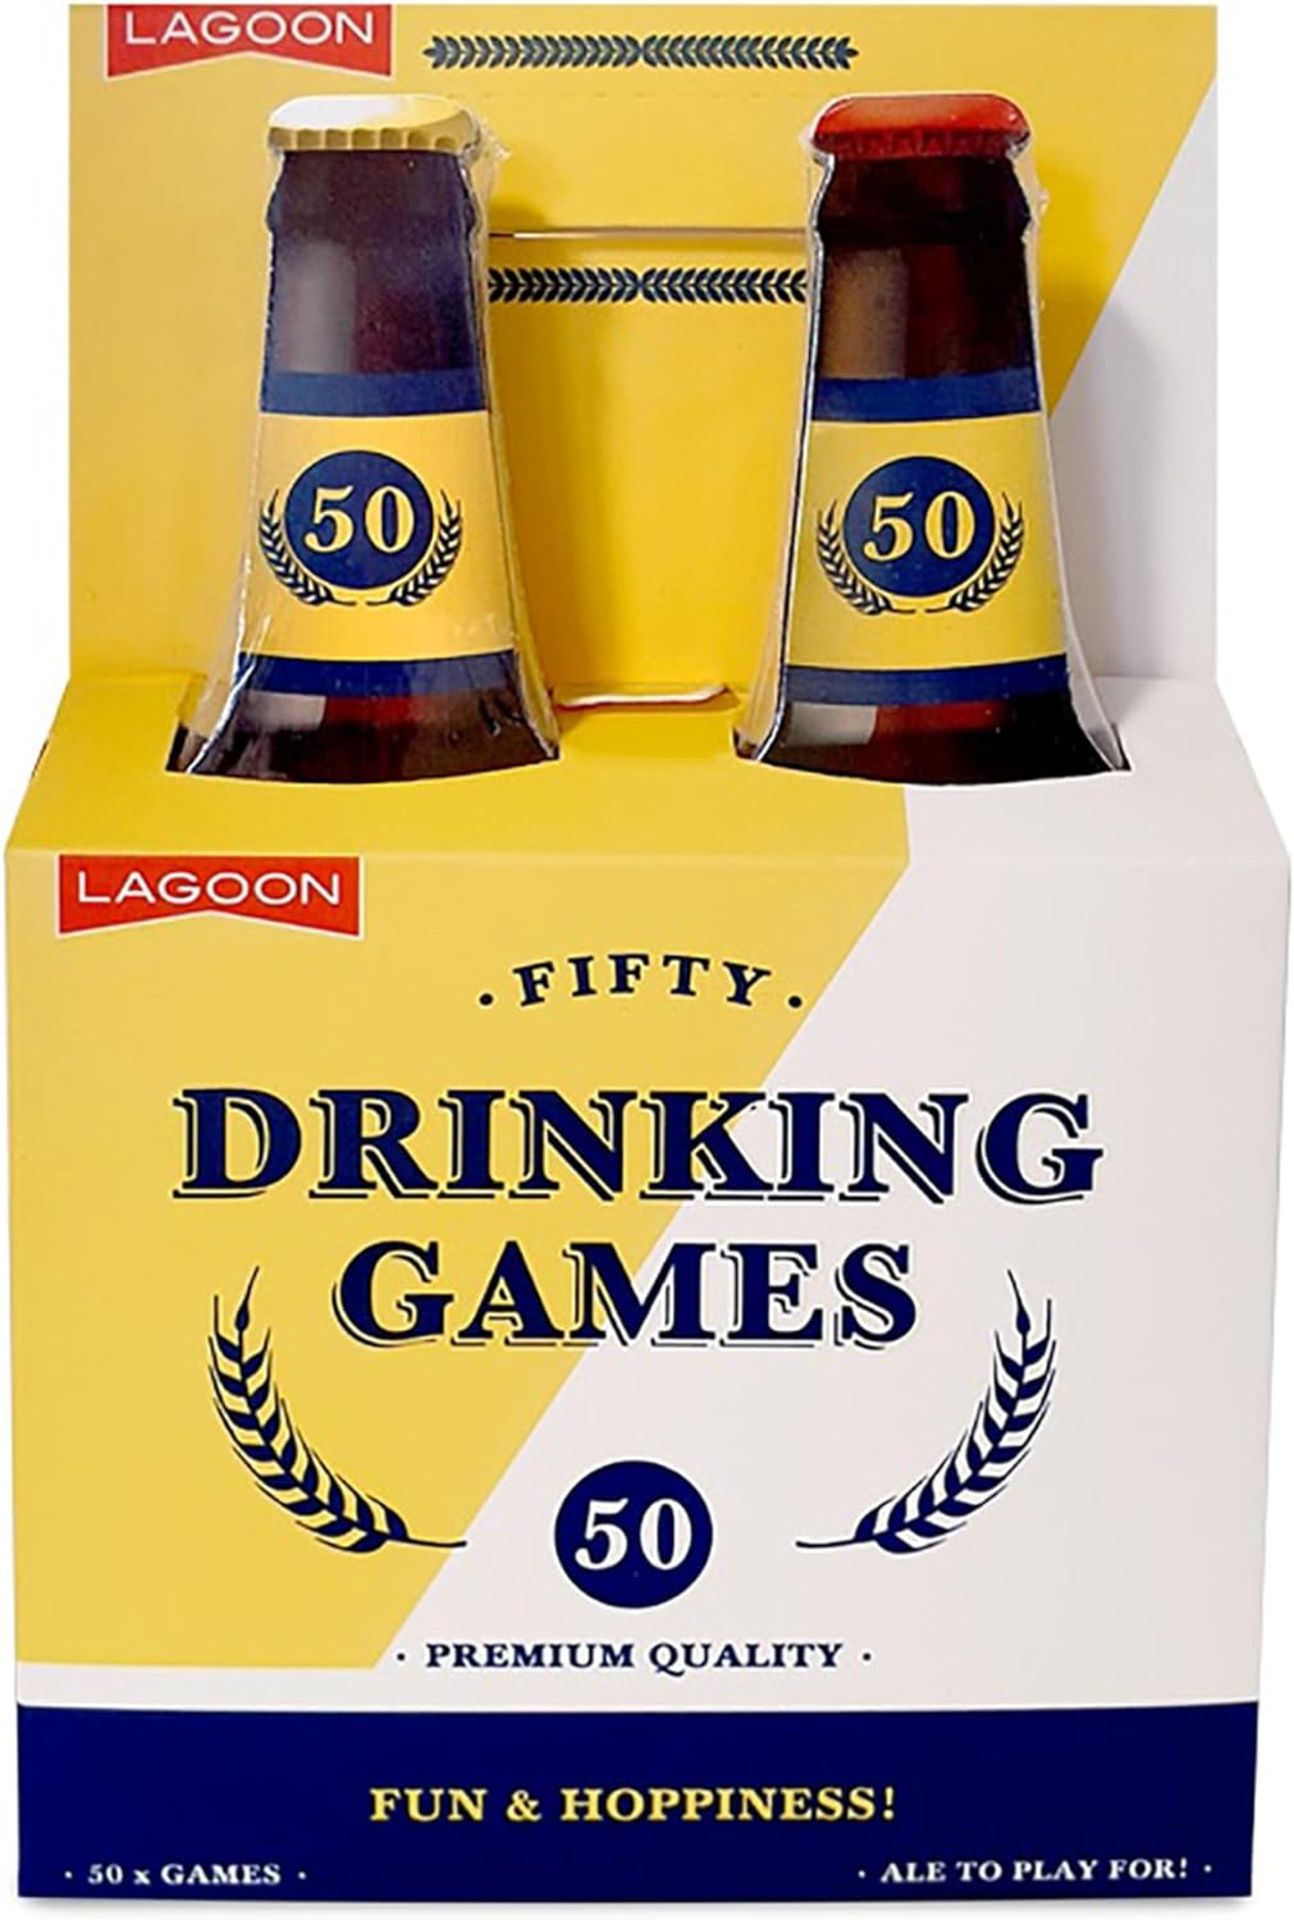 100 X NEW FIFTY DRINKING GAMES - Image 4 of 4